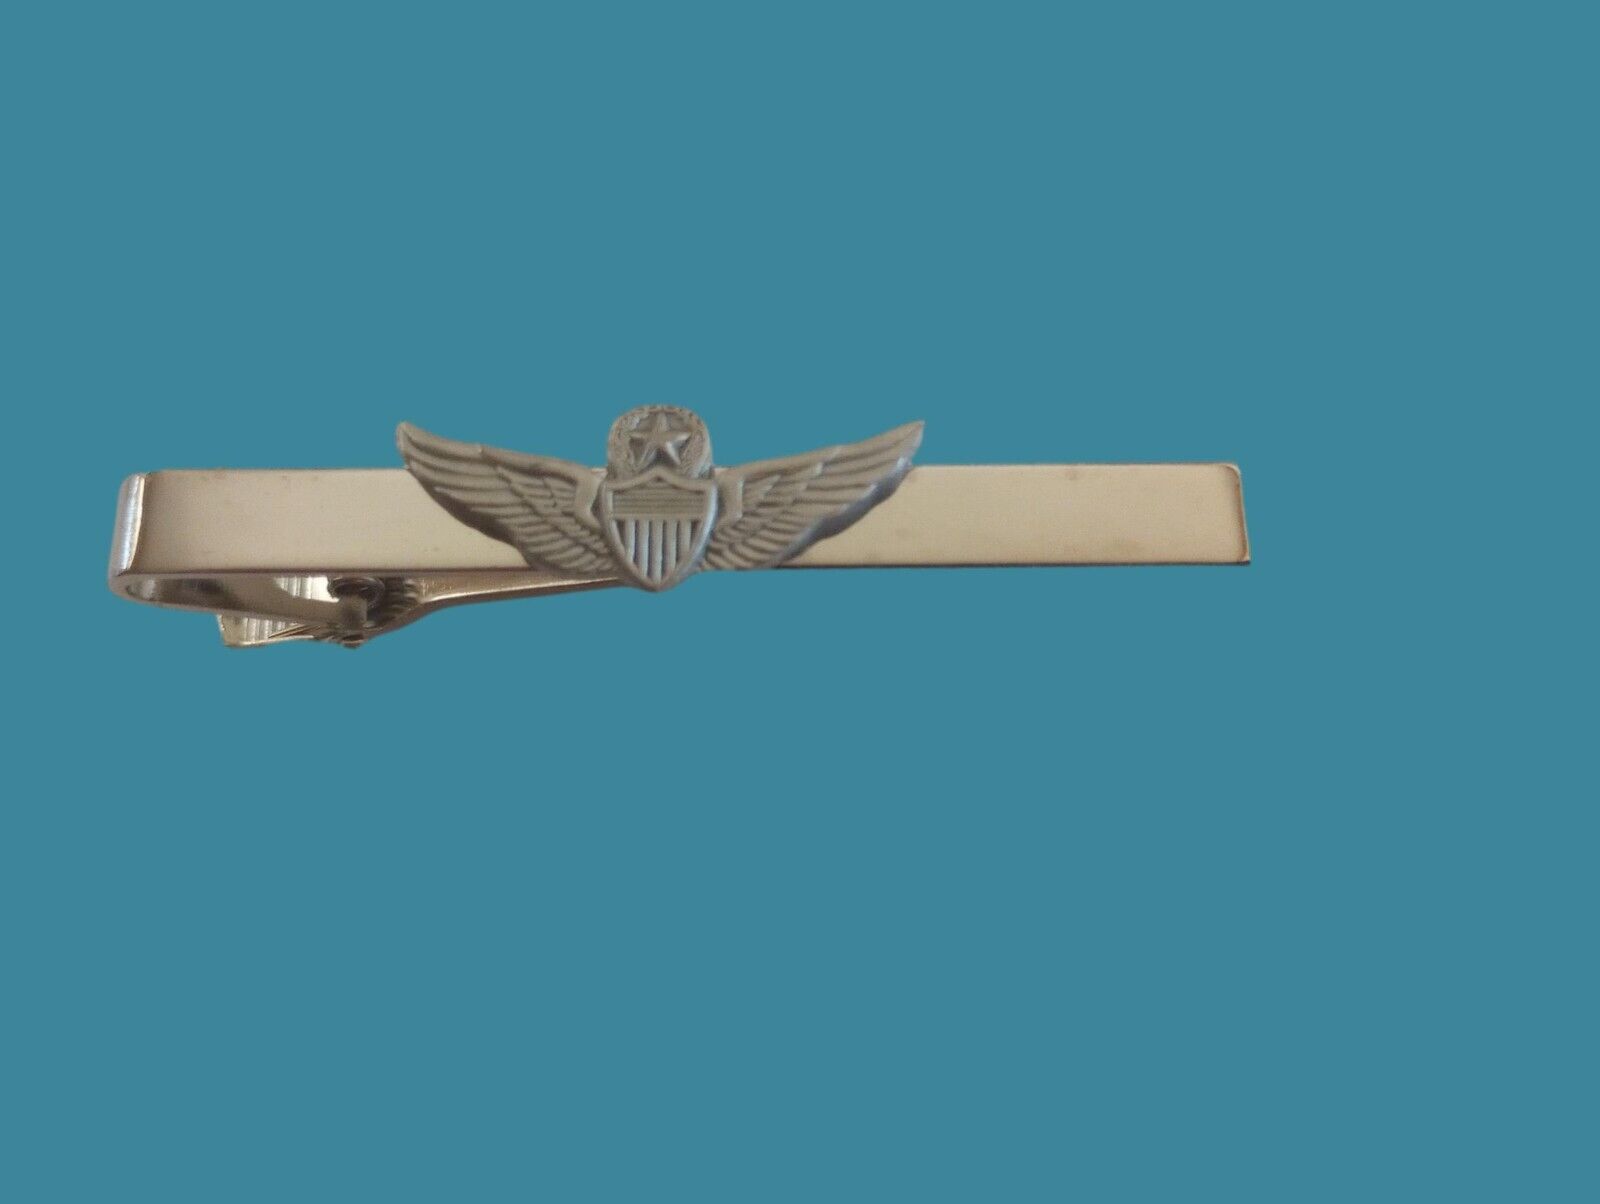 U.S MILITARY ARMY MASTER AVIATOR TIE BAR TIE TAC U.S MADE OFFICIAL ARMY PRODUCT